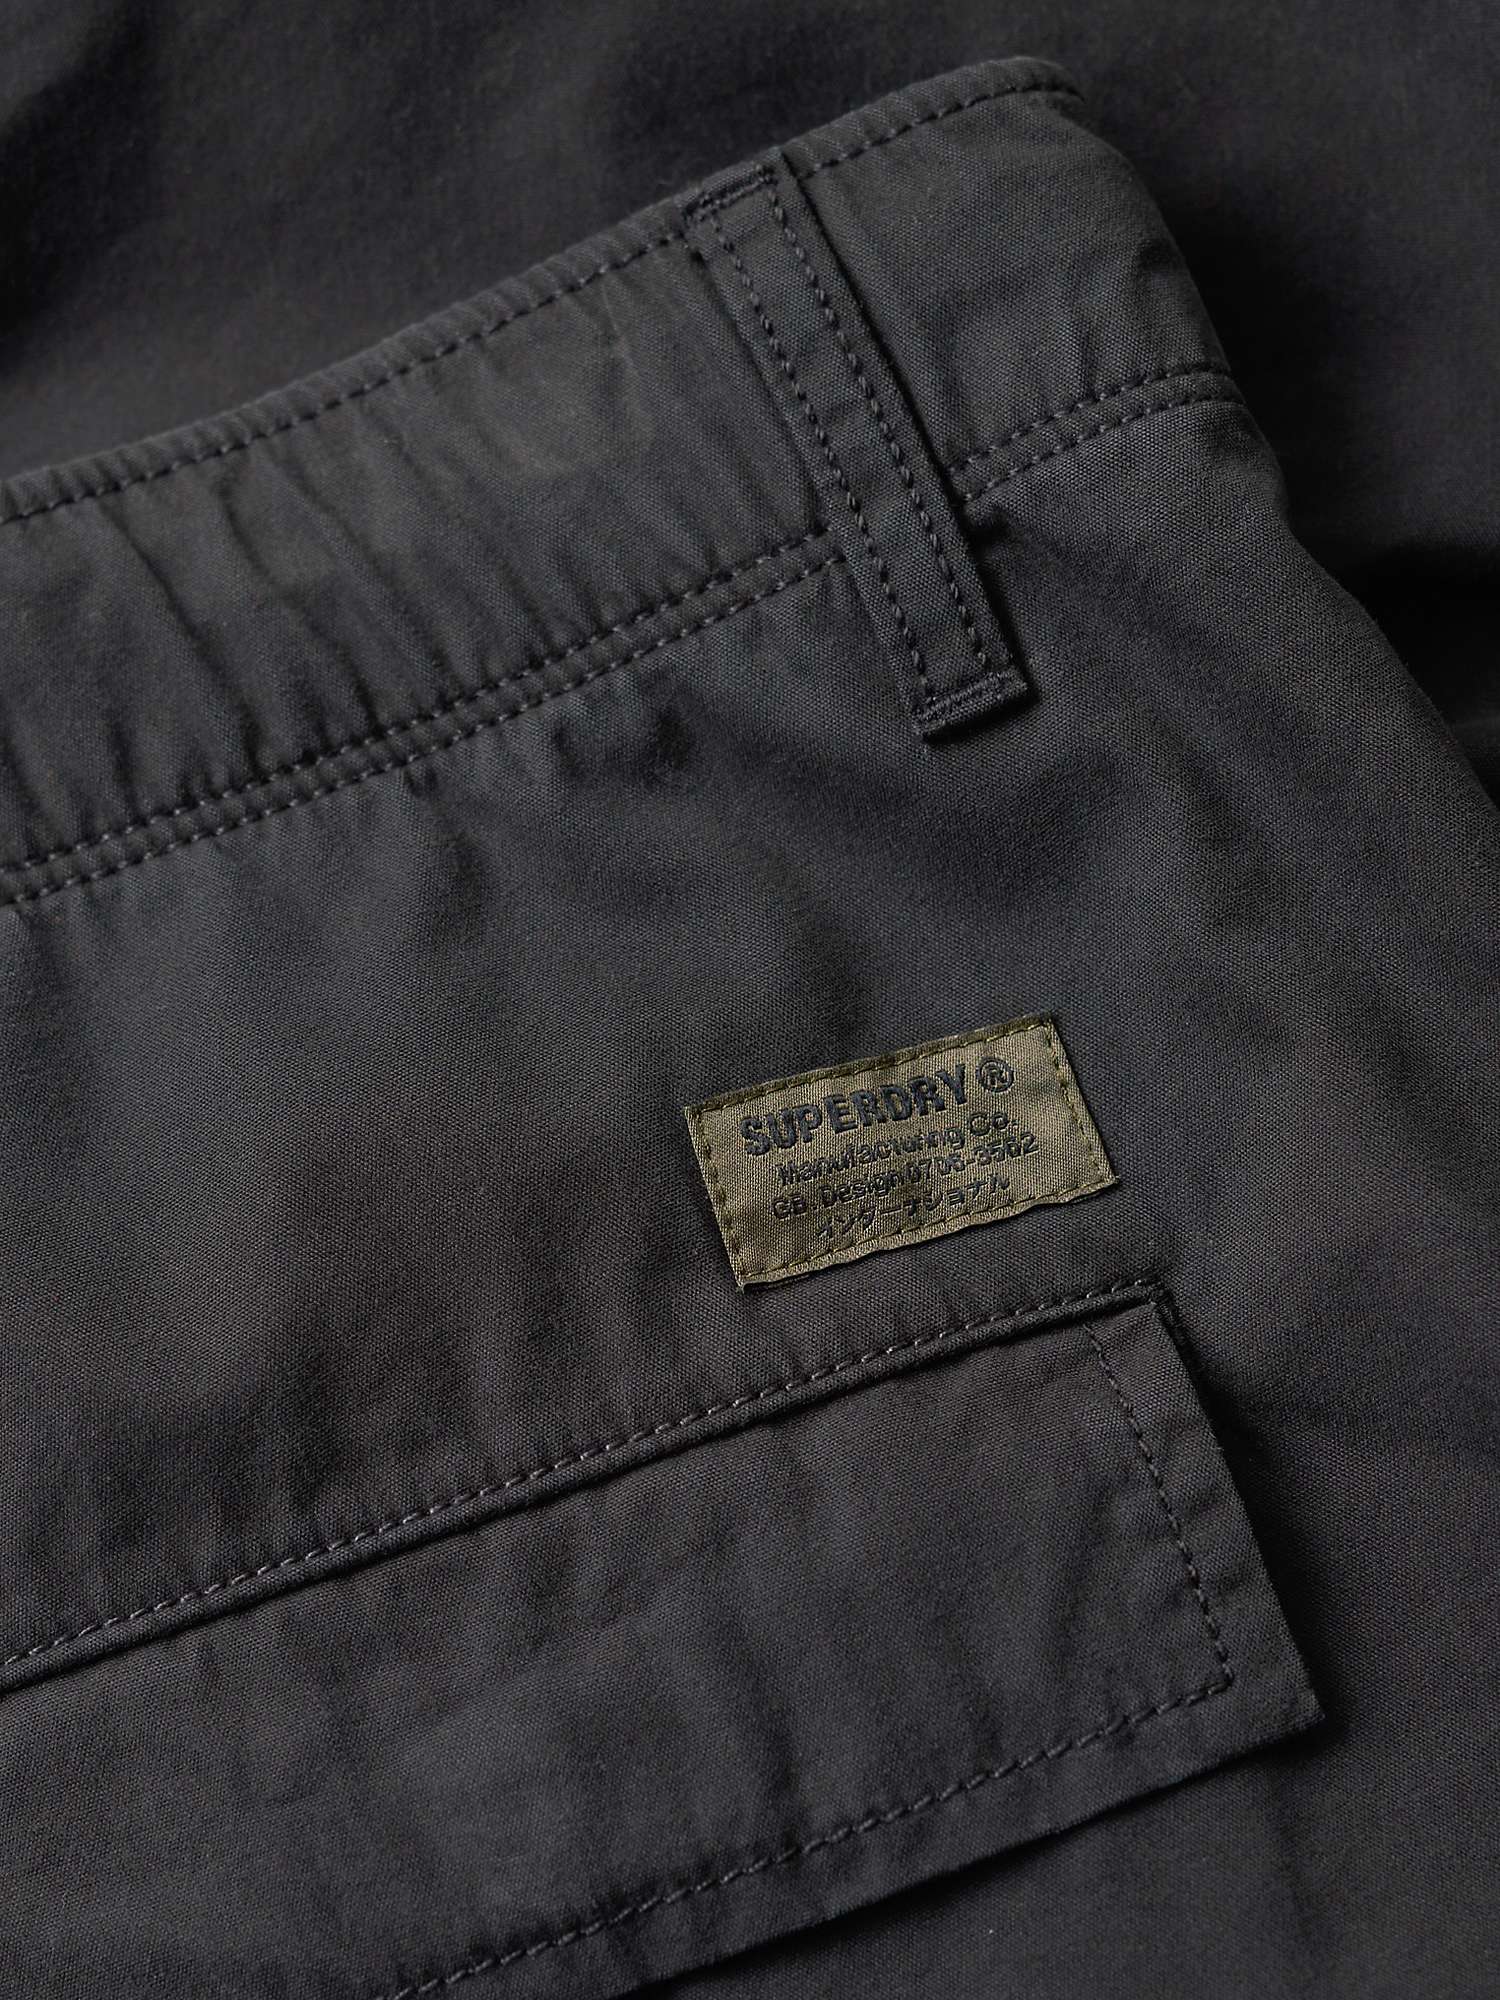 Buy Superdry Cotton Cargo Trousers, Black Online at johnlewis.com